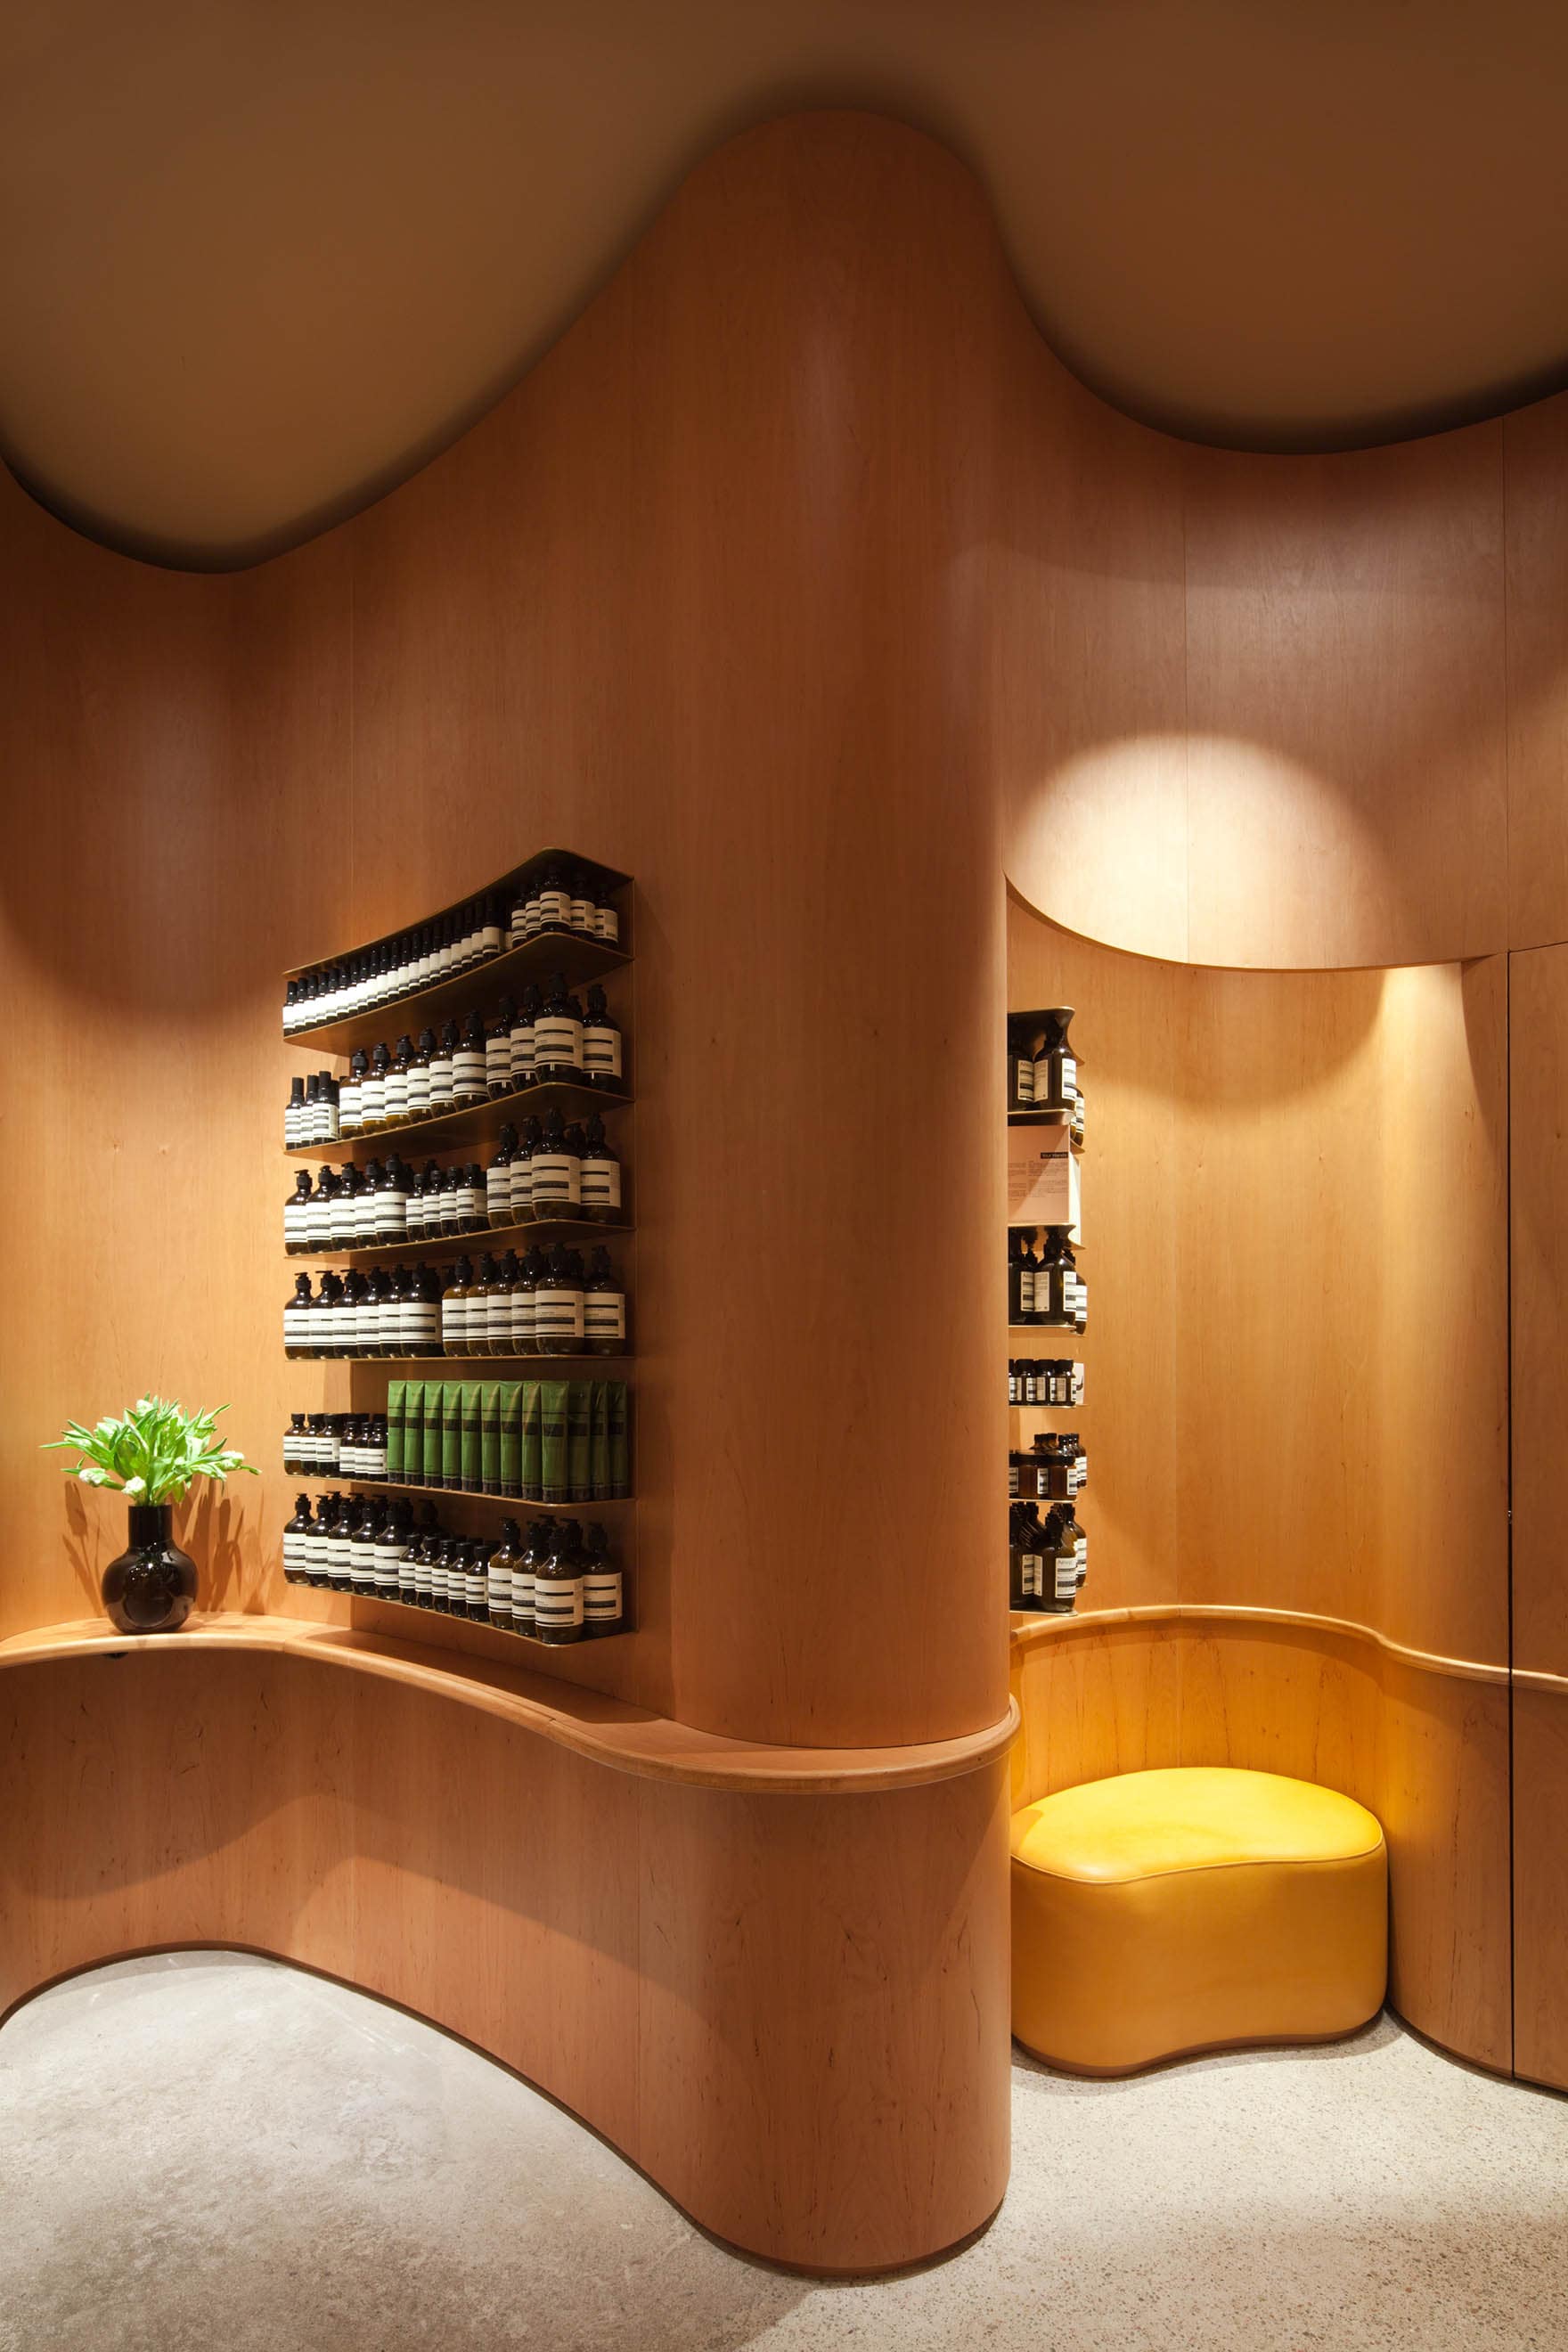 Aesop store, product on shelves, curved wall detail